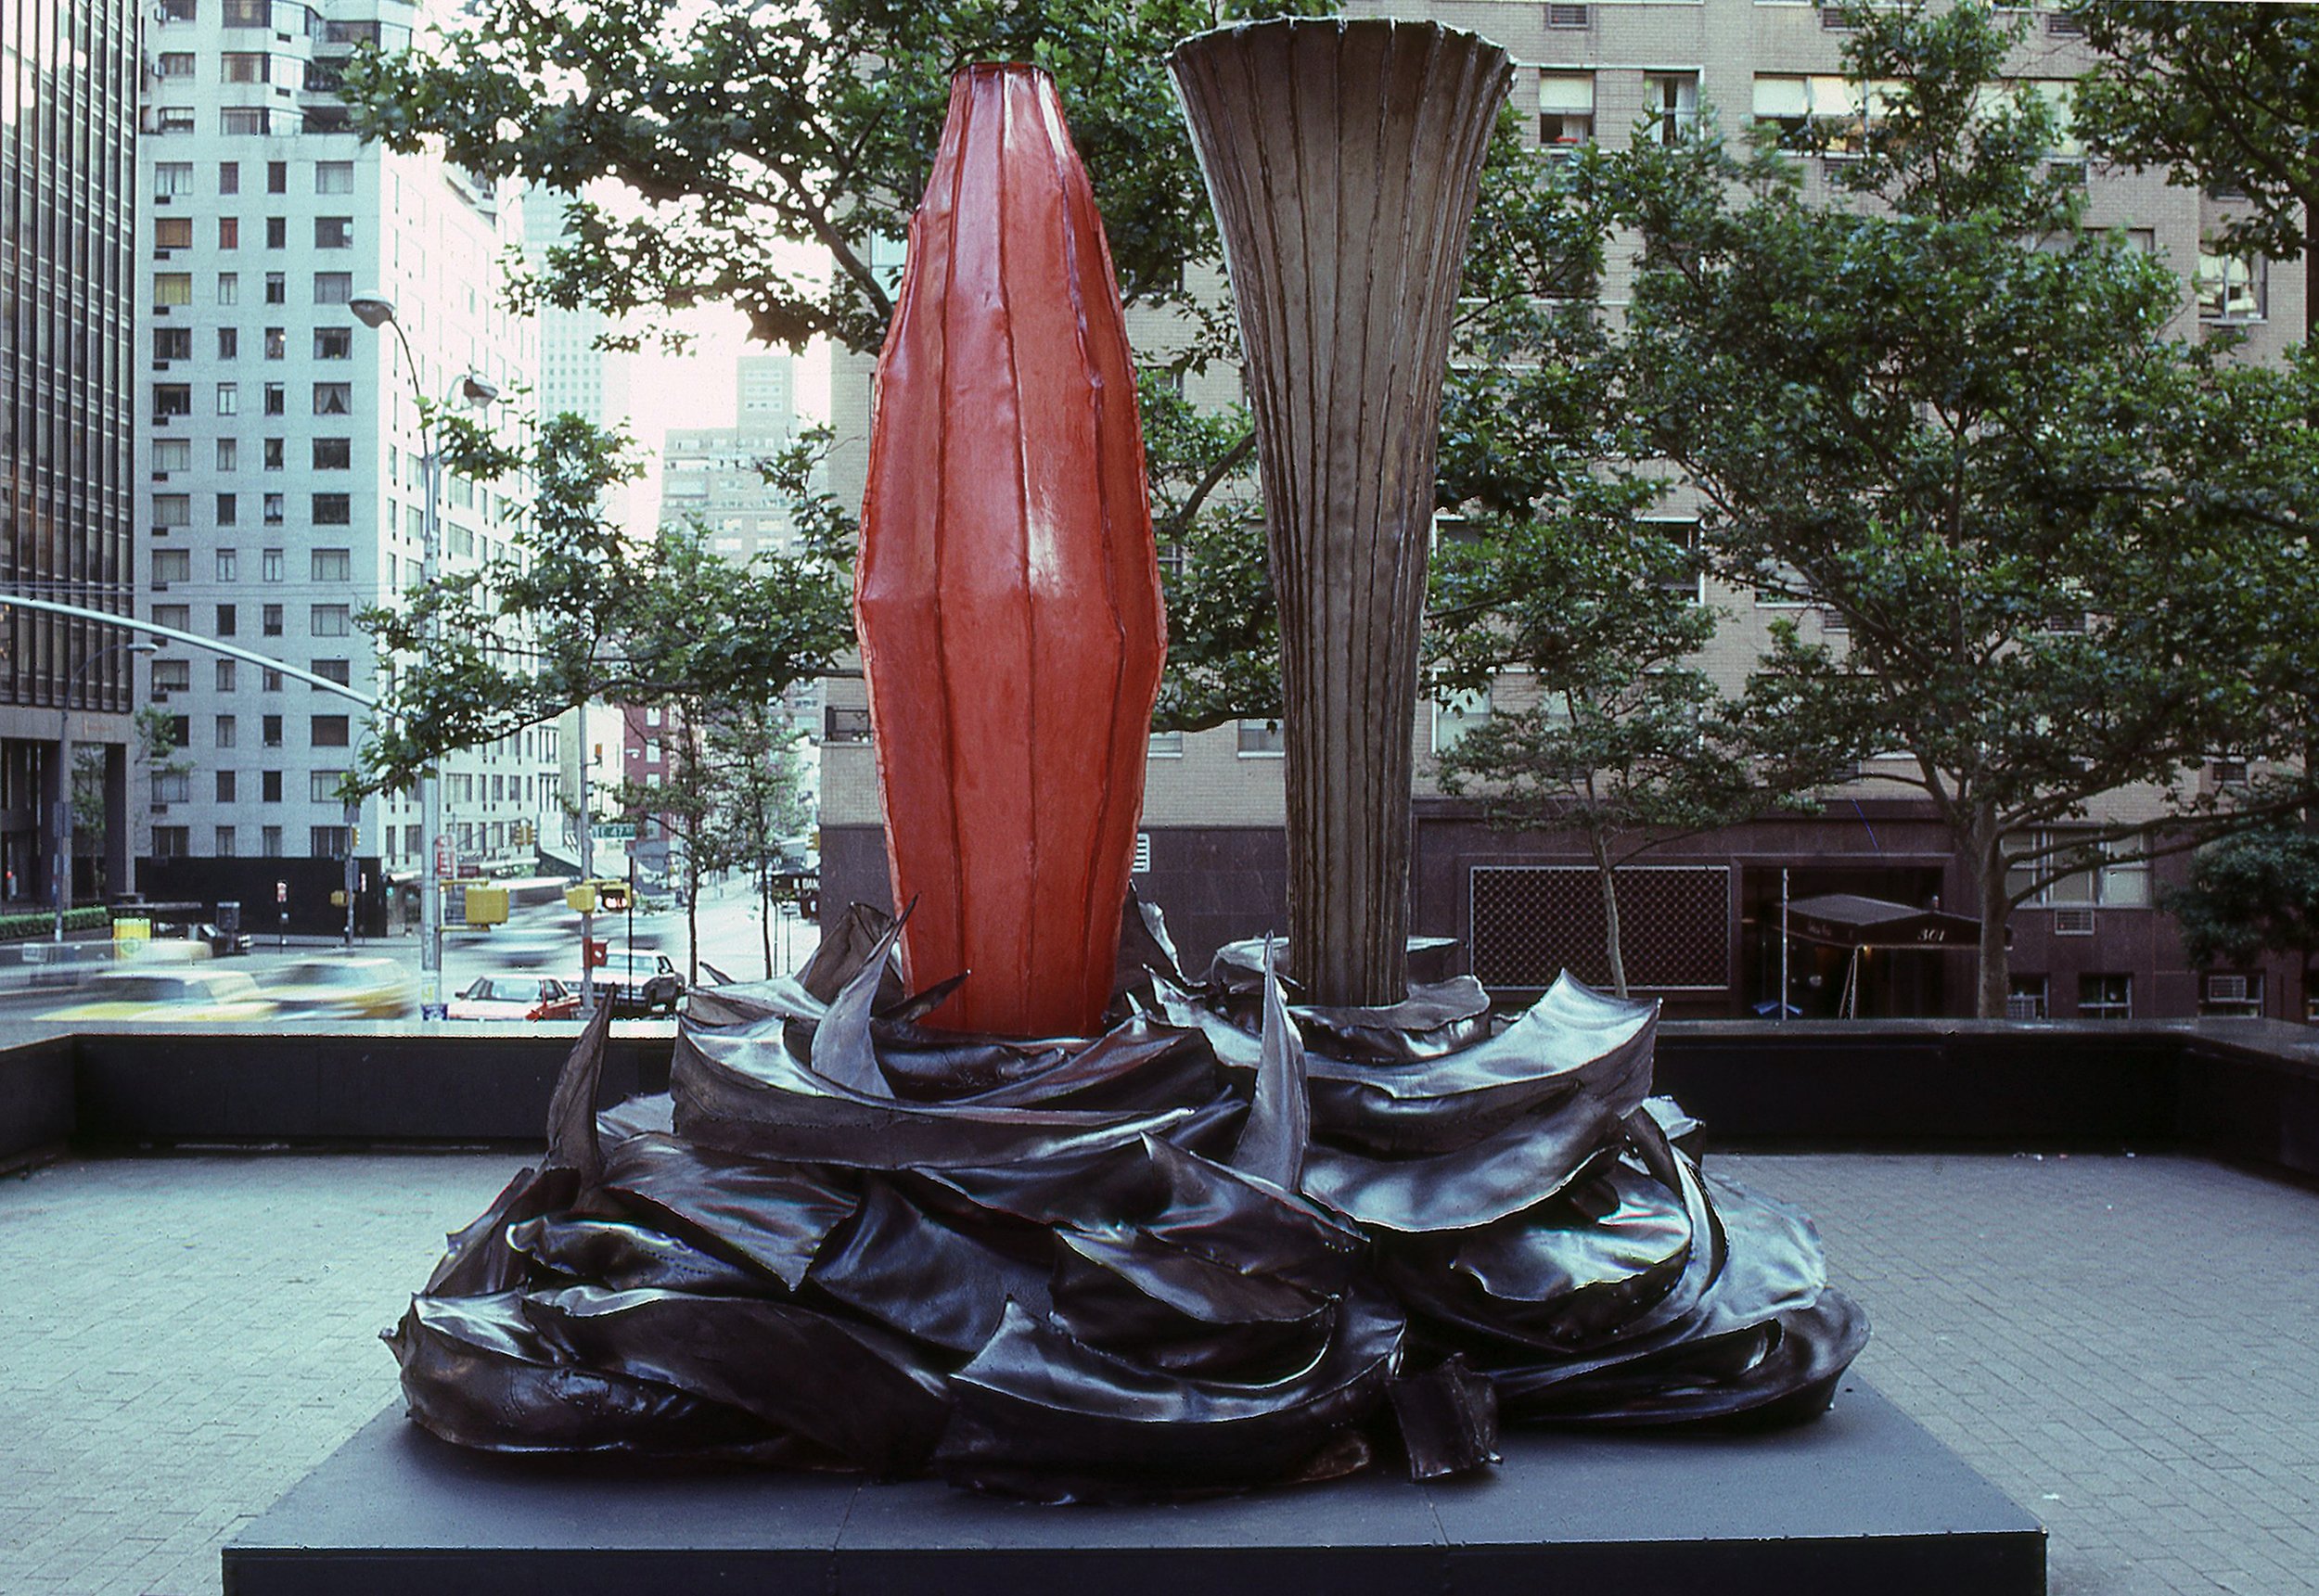  W.H./M.M.D., 1983, fiberglass and resin, 11 x 12  x 8.5  feet (3.35 x 3.65 x 2.59 meters), Hammarskjold Plaza Sculpture Garden, Second avenue at 47th St., New York City (photo: courtesy of the artist)  The first element bulges at its middle while th